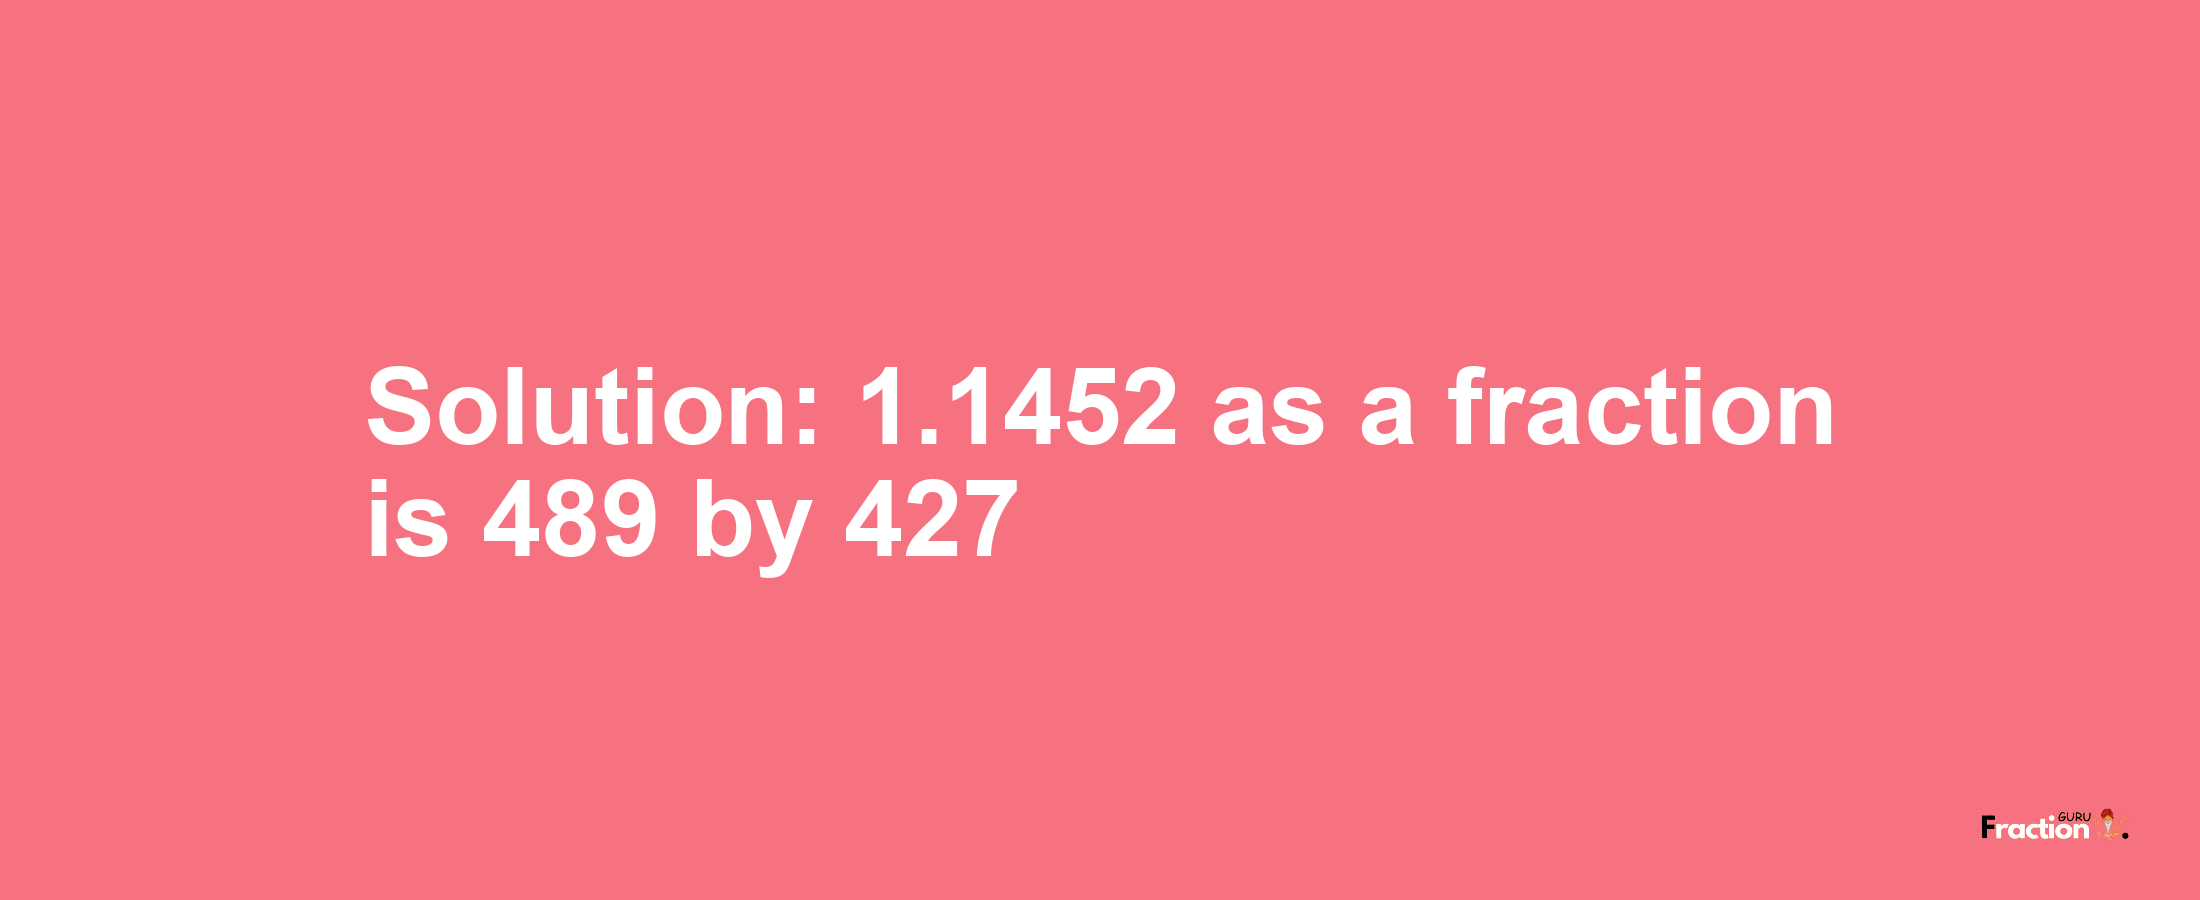 Solution:1.1452 as a fraction is 489/427